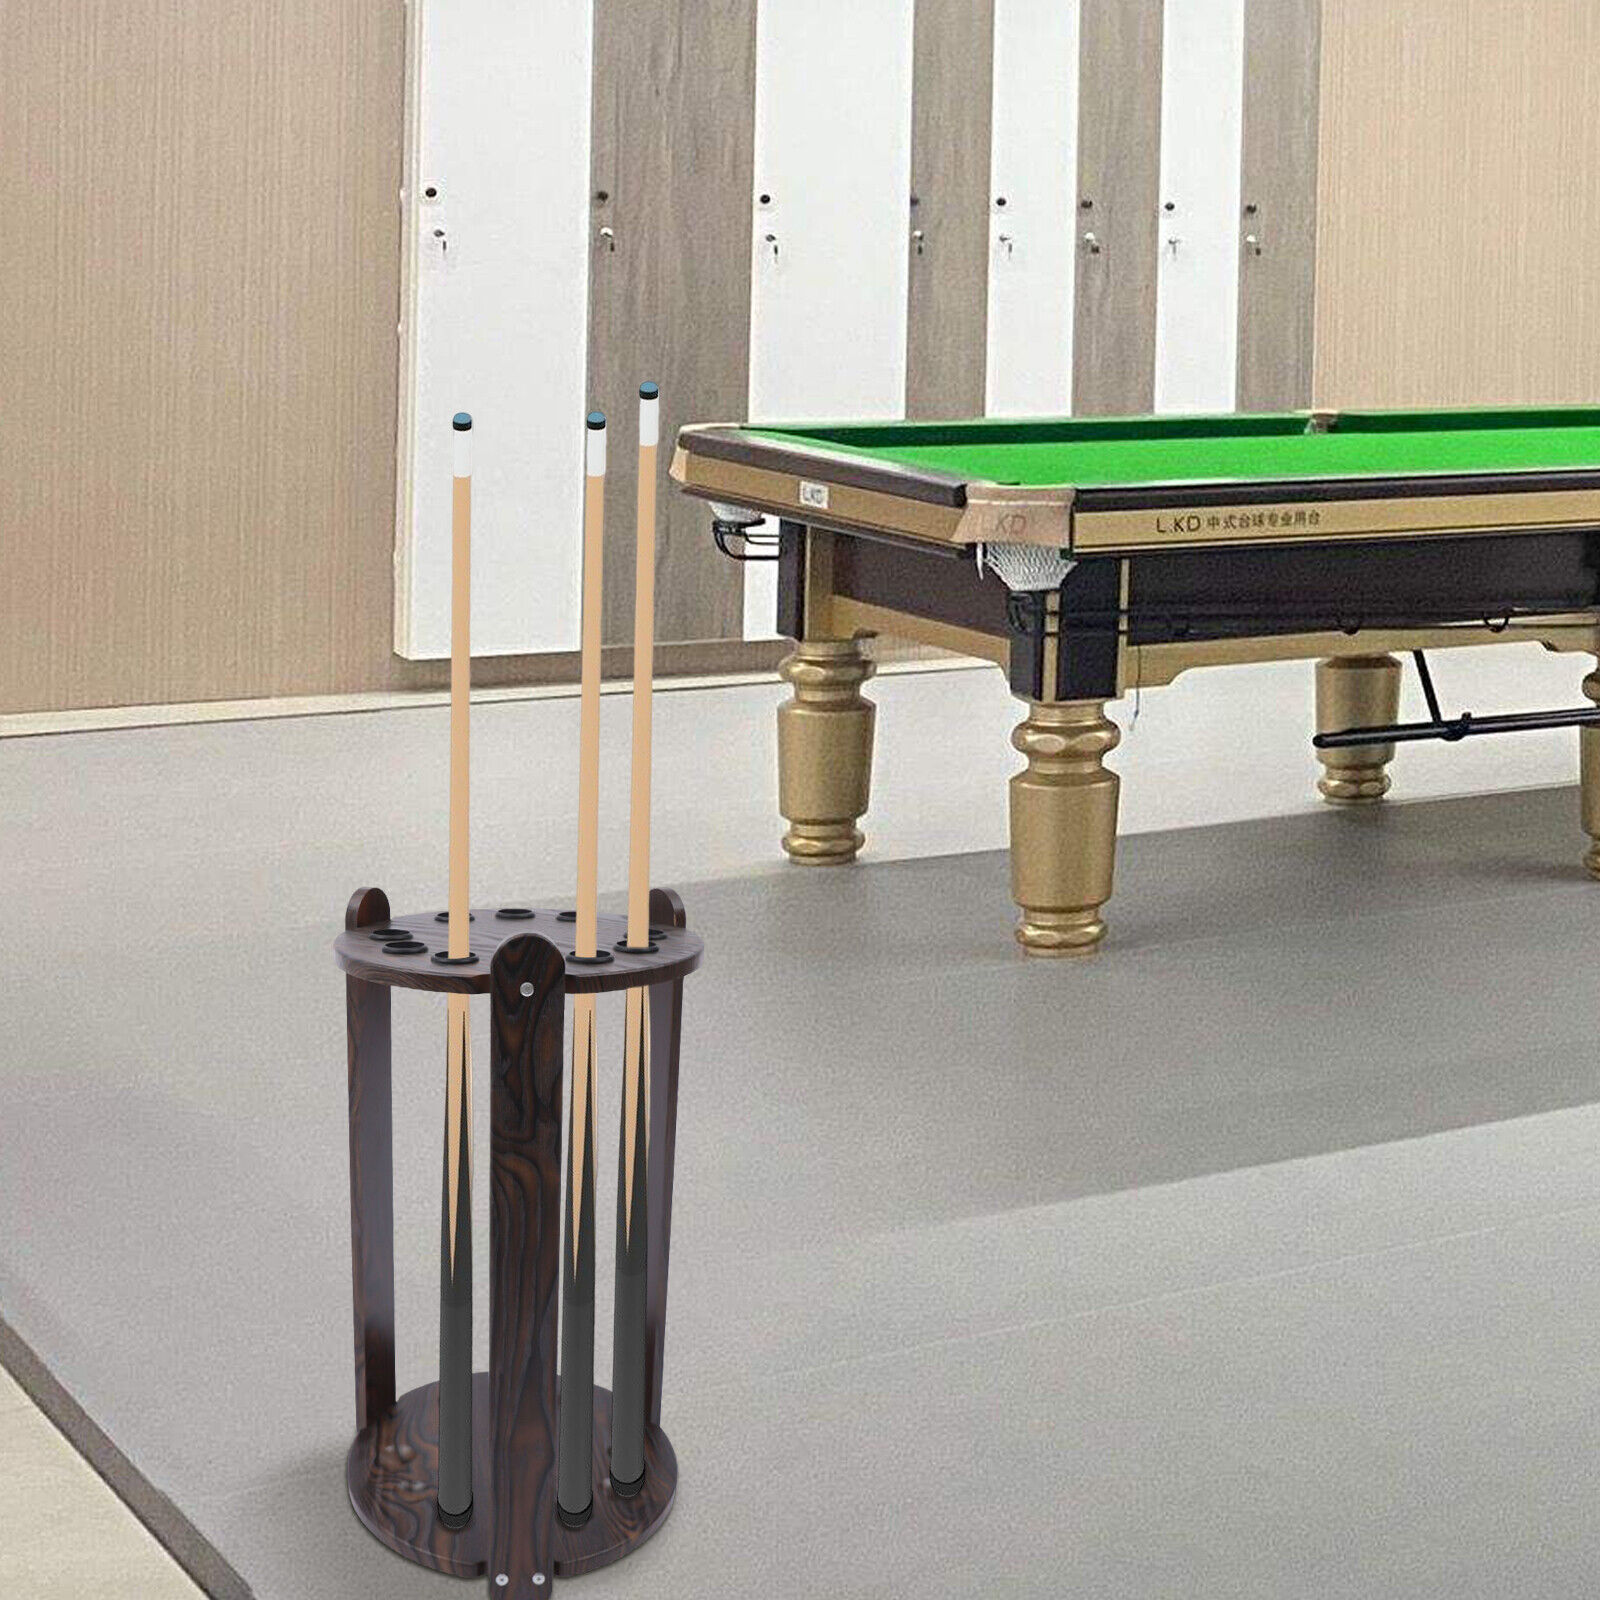 9 Pool Cue Rack Torage Holder Wooden Round Floor Stand Billiard Stick Cue Rack Unbranded Does Not Apply